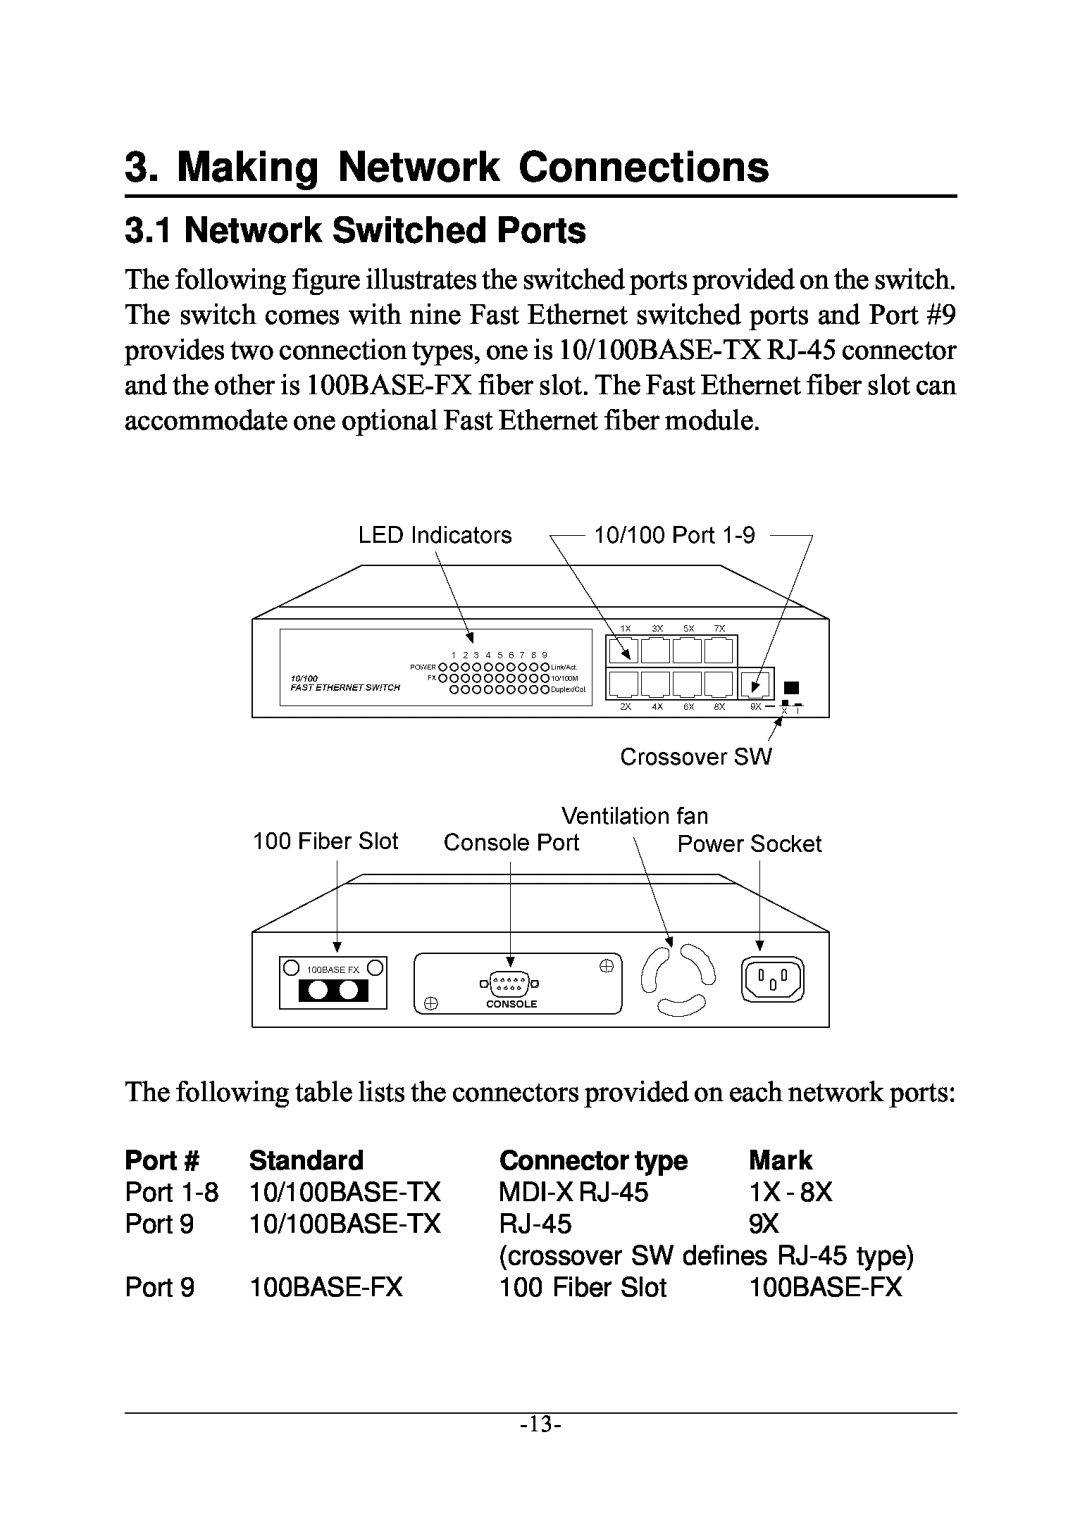 KTI Networks KS-801 manual Making Network Connections, Network Switched Ports, Port #, Standard, Connector type, Mark 